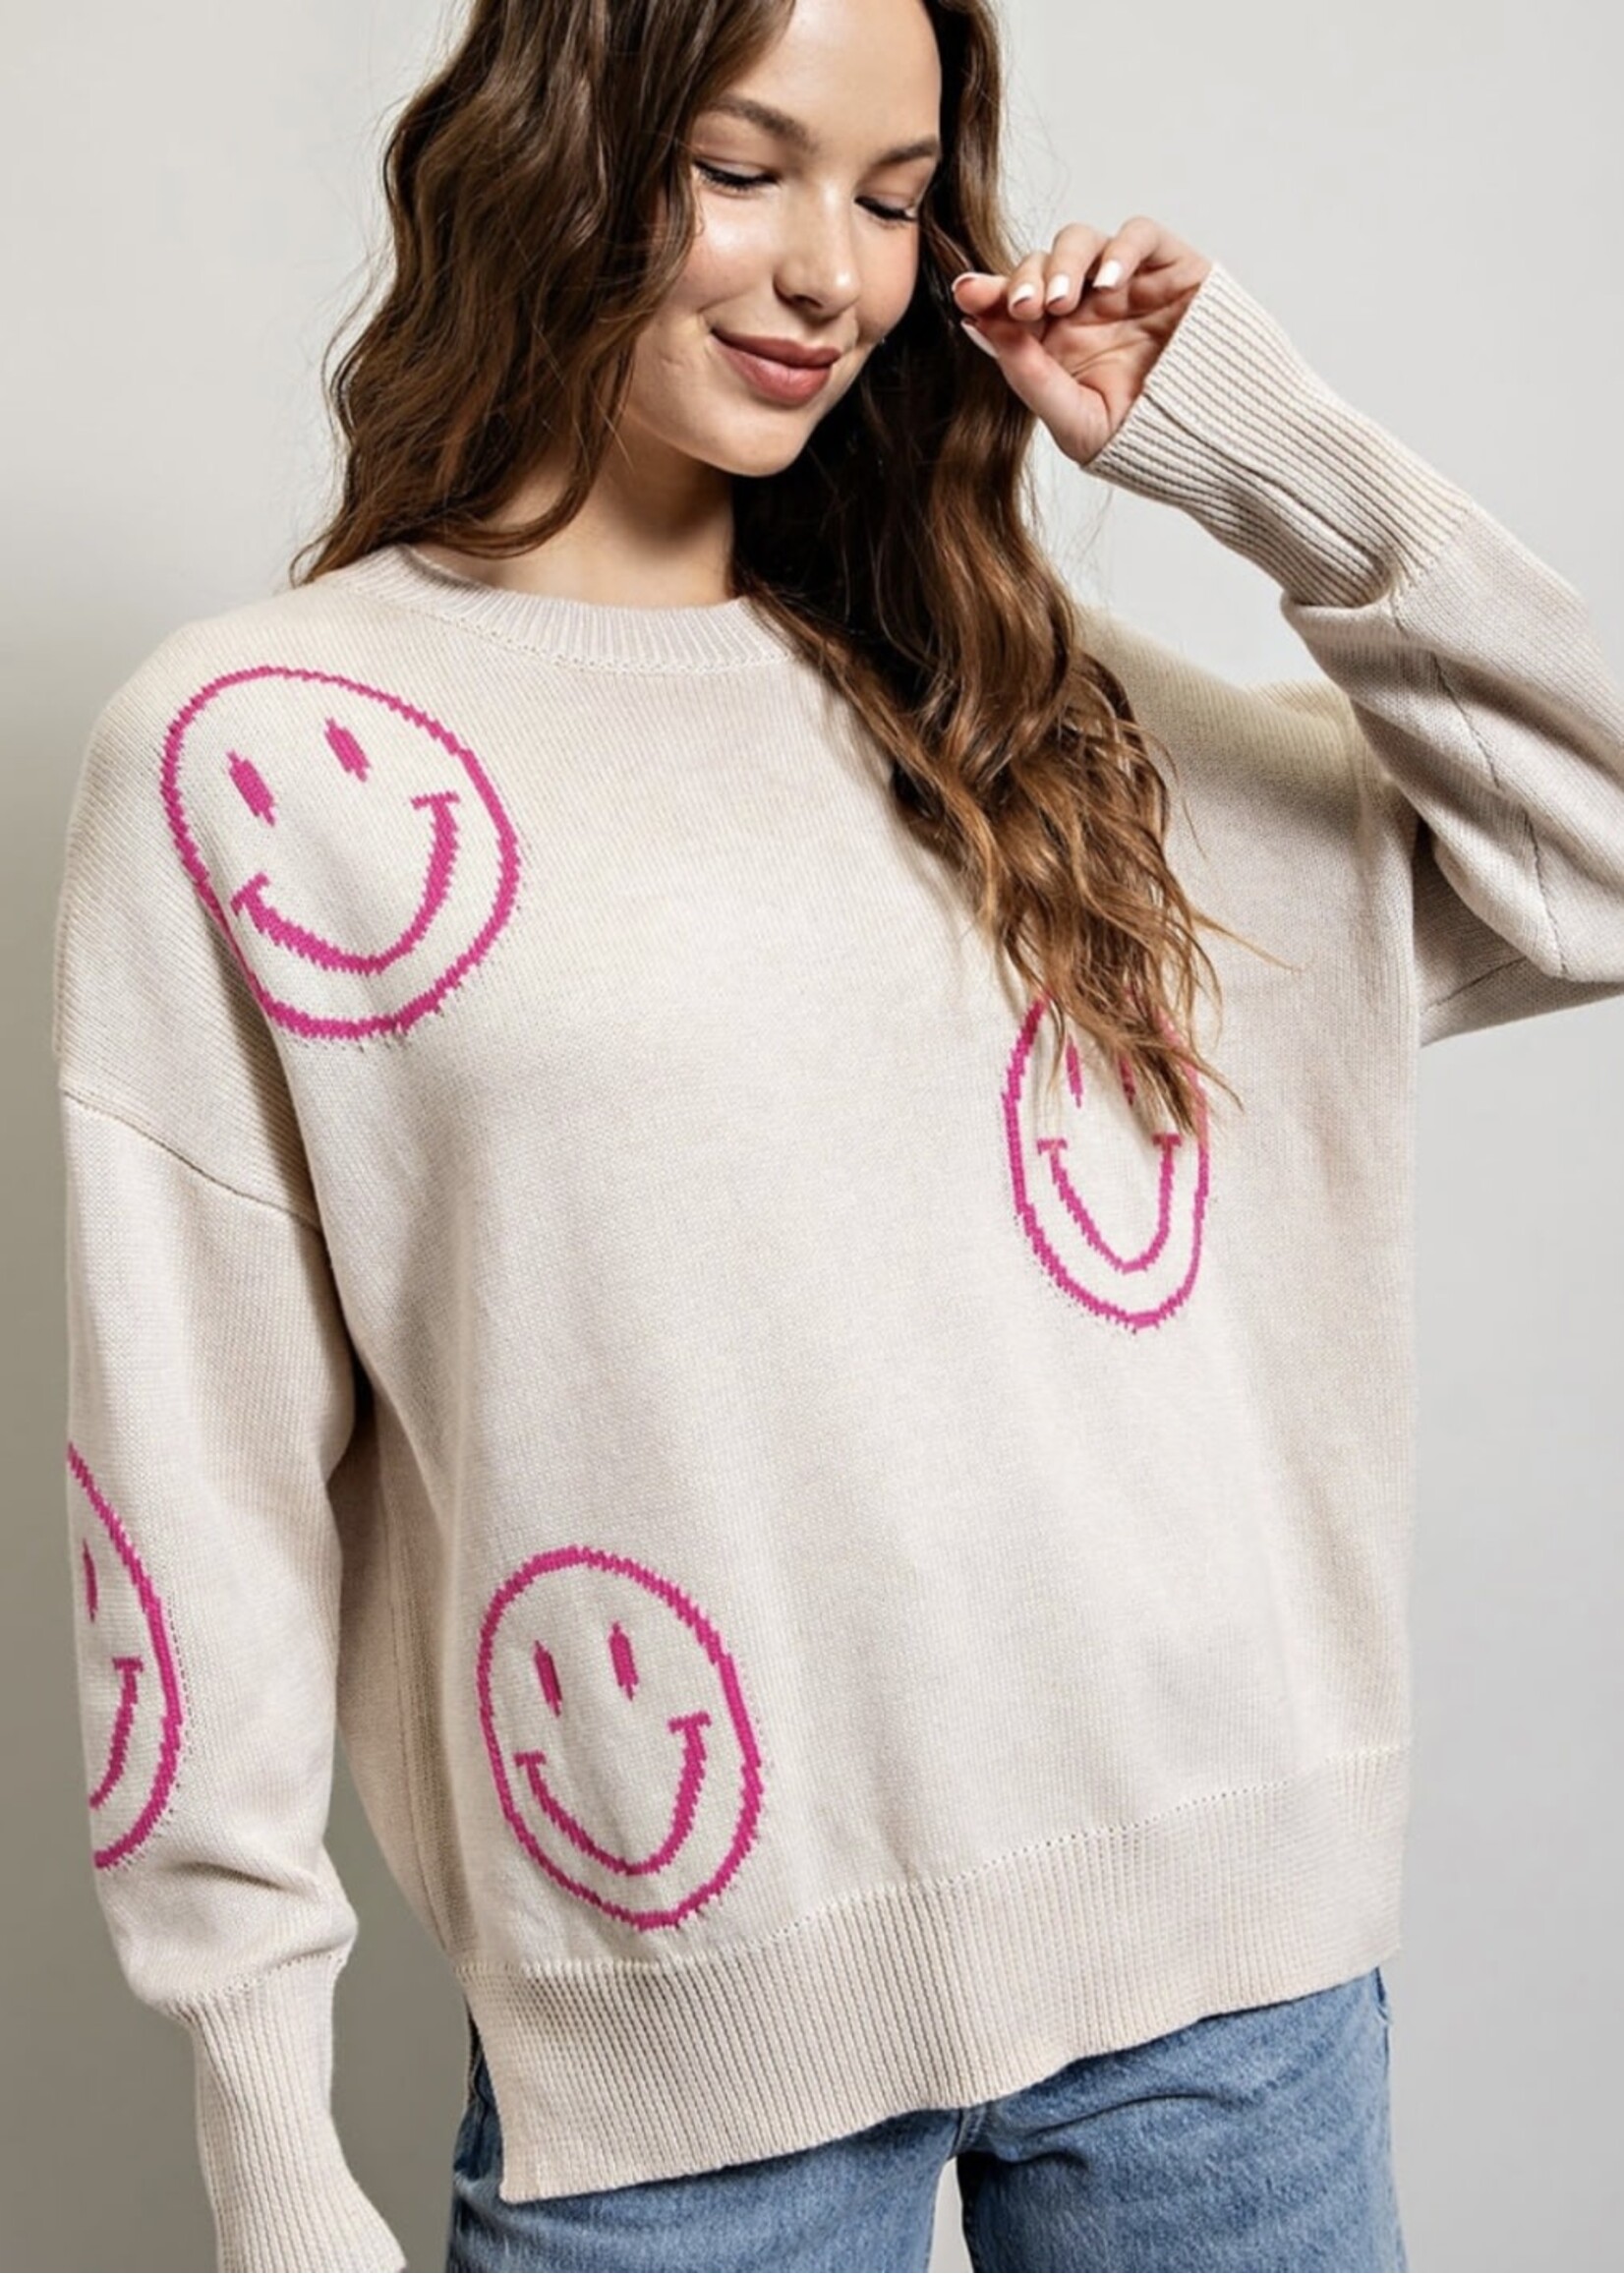 Smiley Vibes Sweater